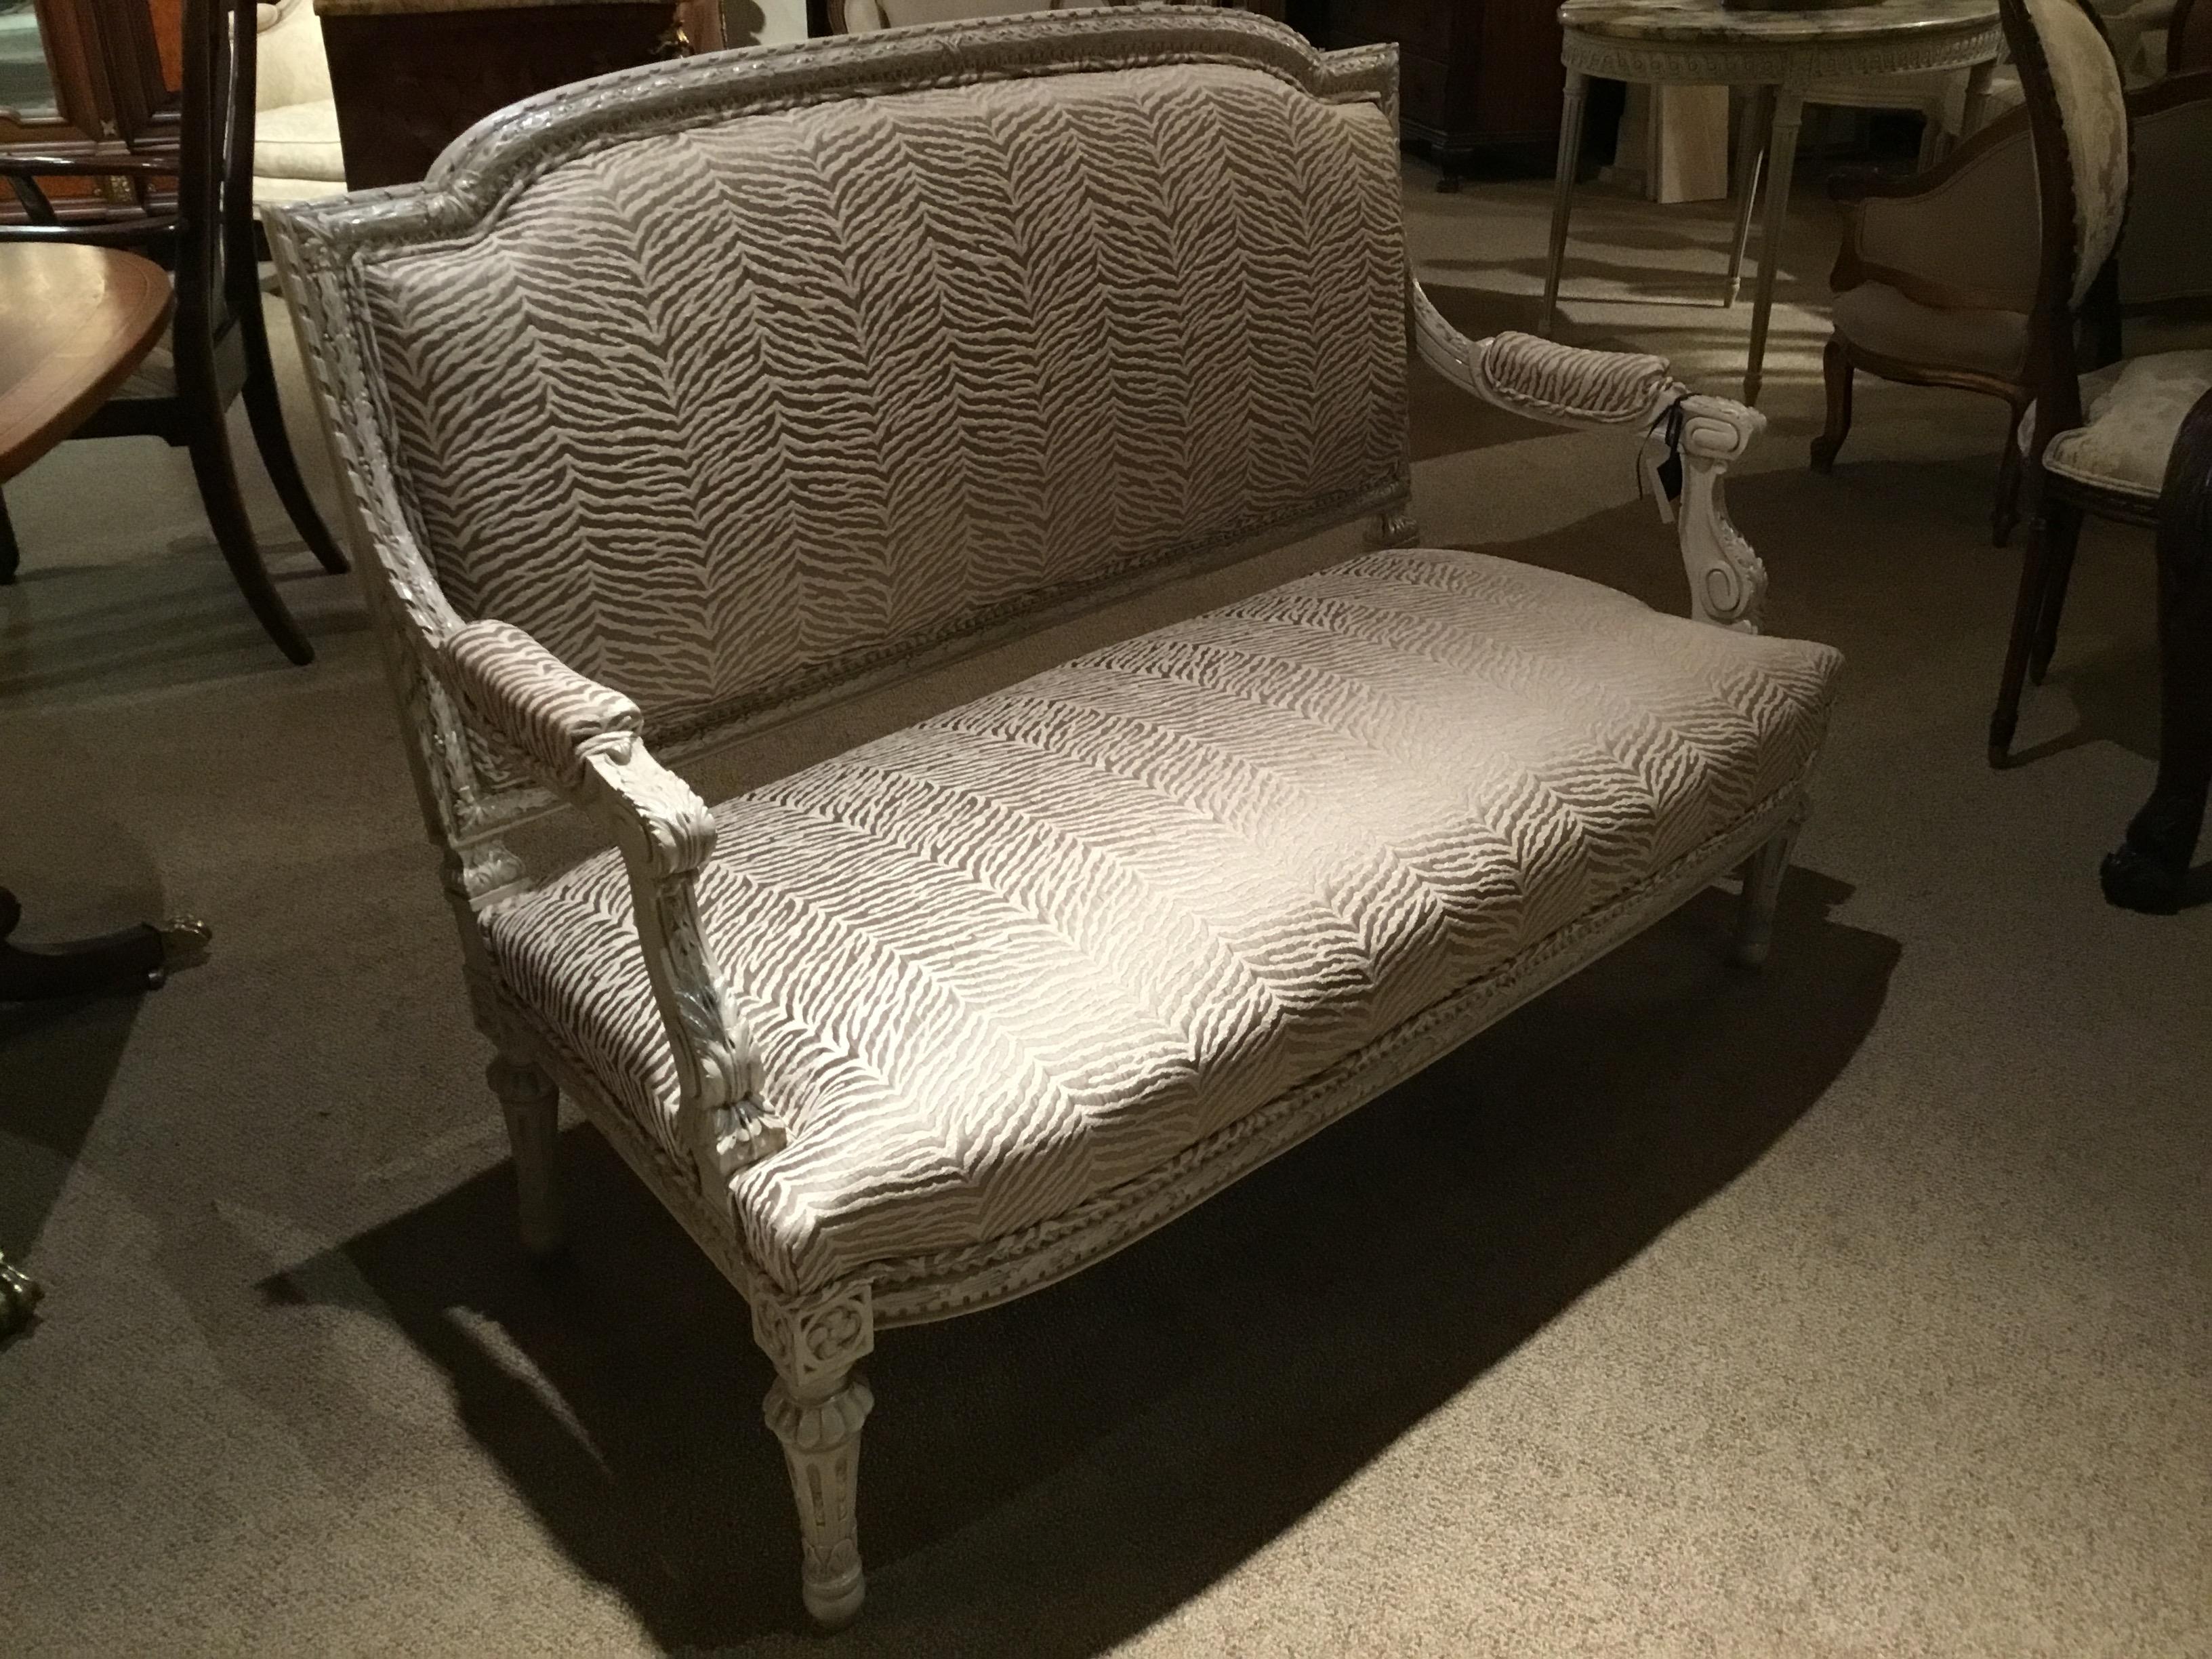 19th century. Settee with new upholstery, polychromed in pale cream color hue. Scrolled arms
With a slightly arched crest rail. Reeded straight legs.